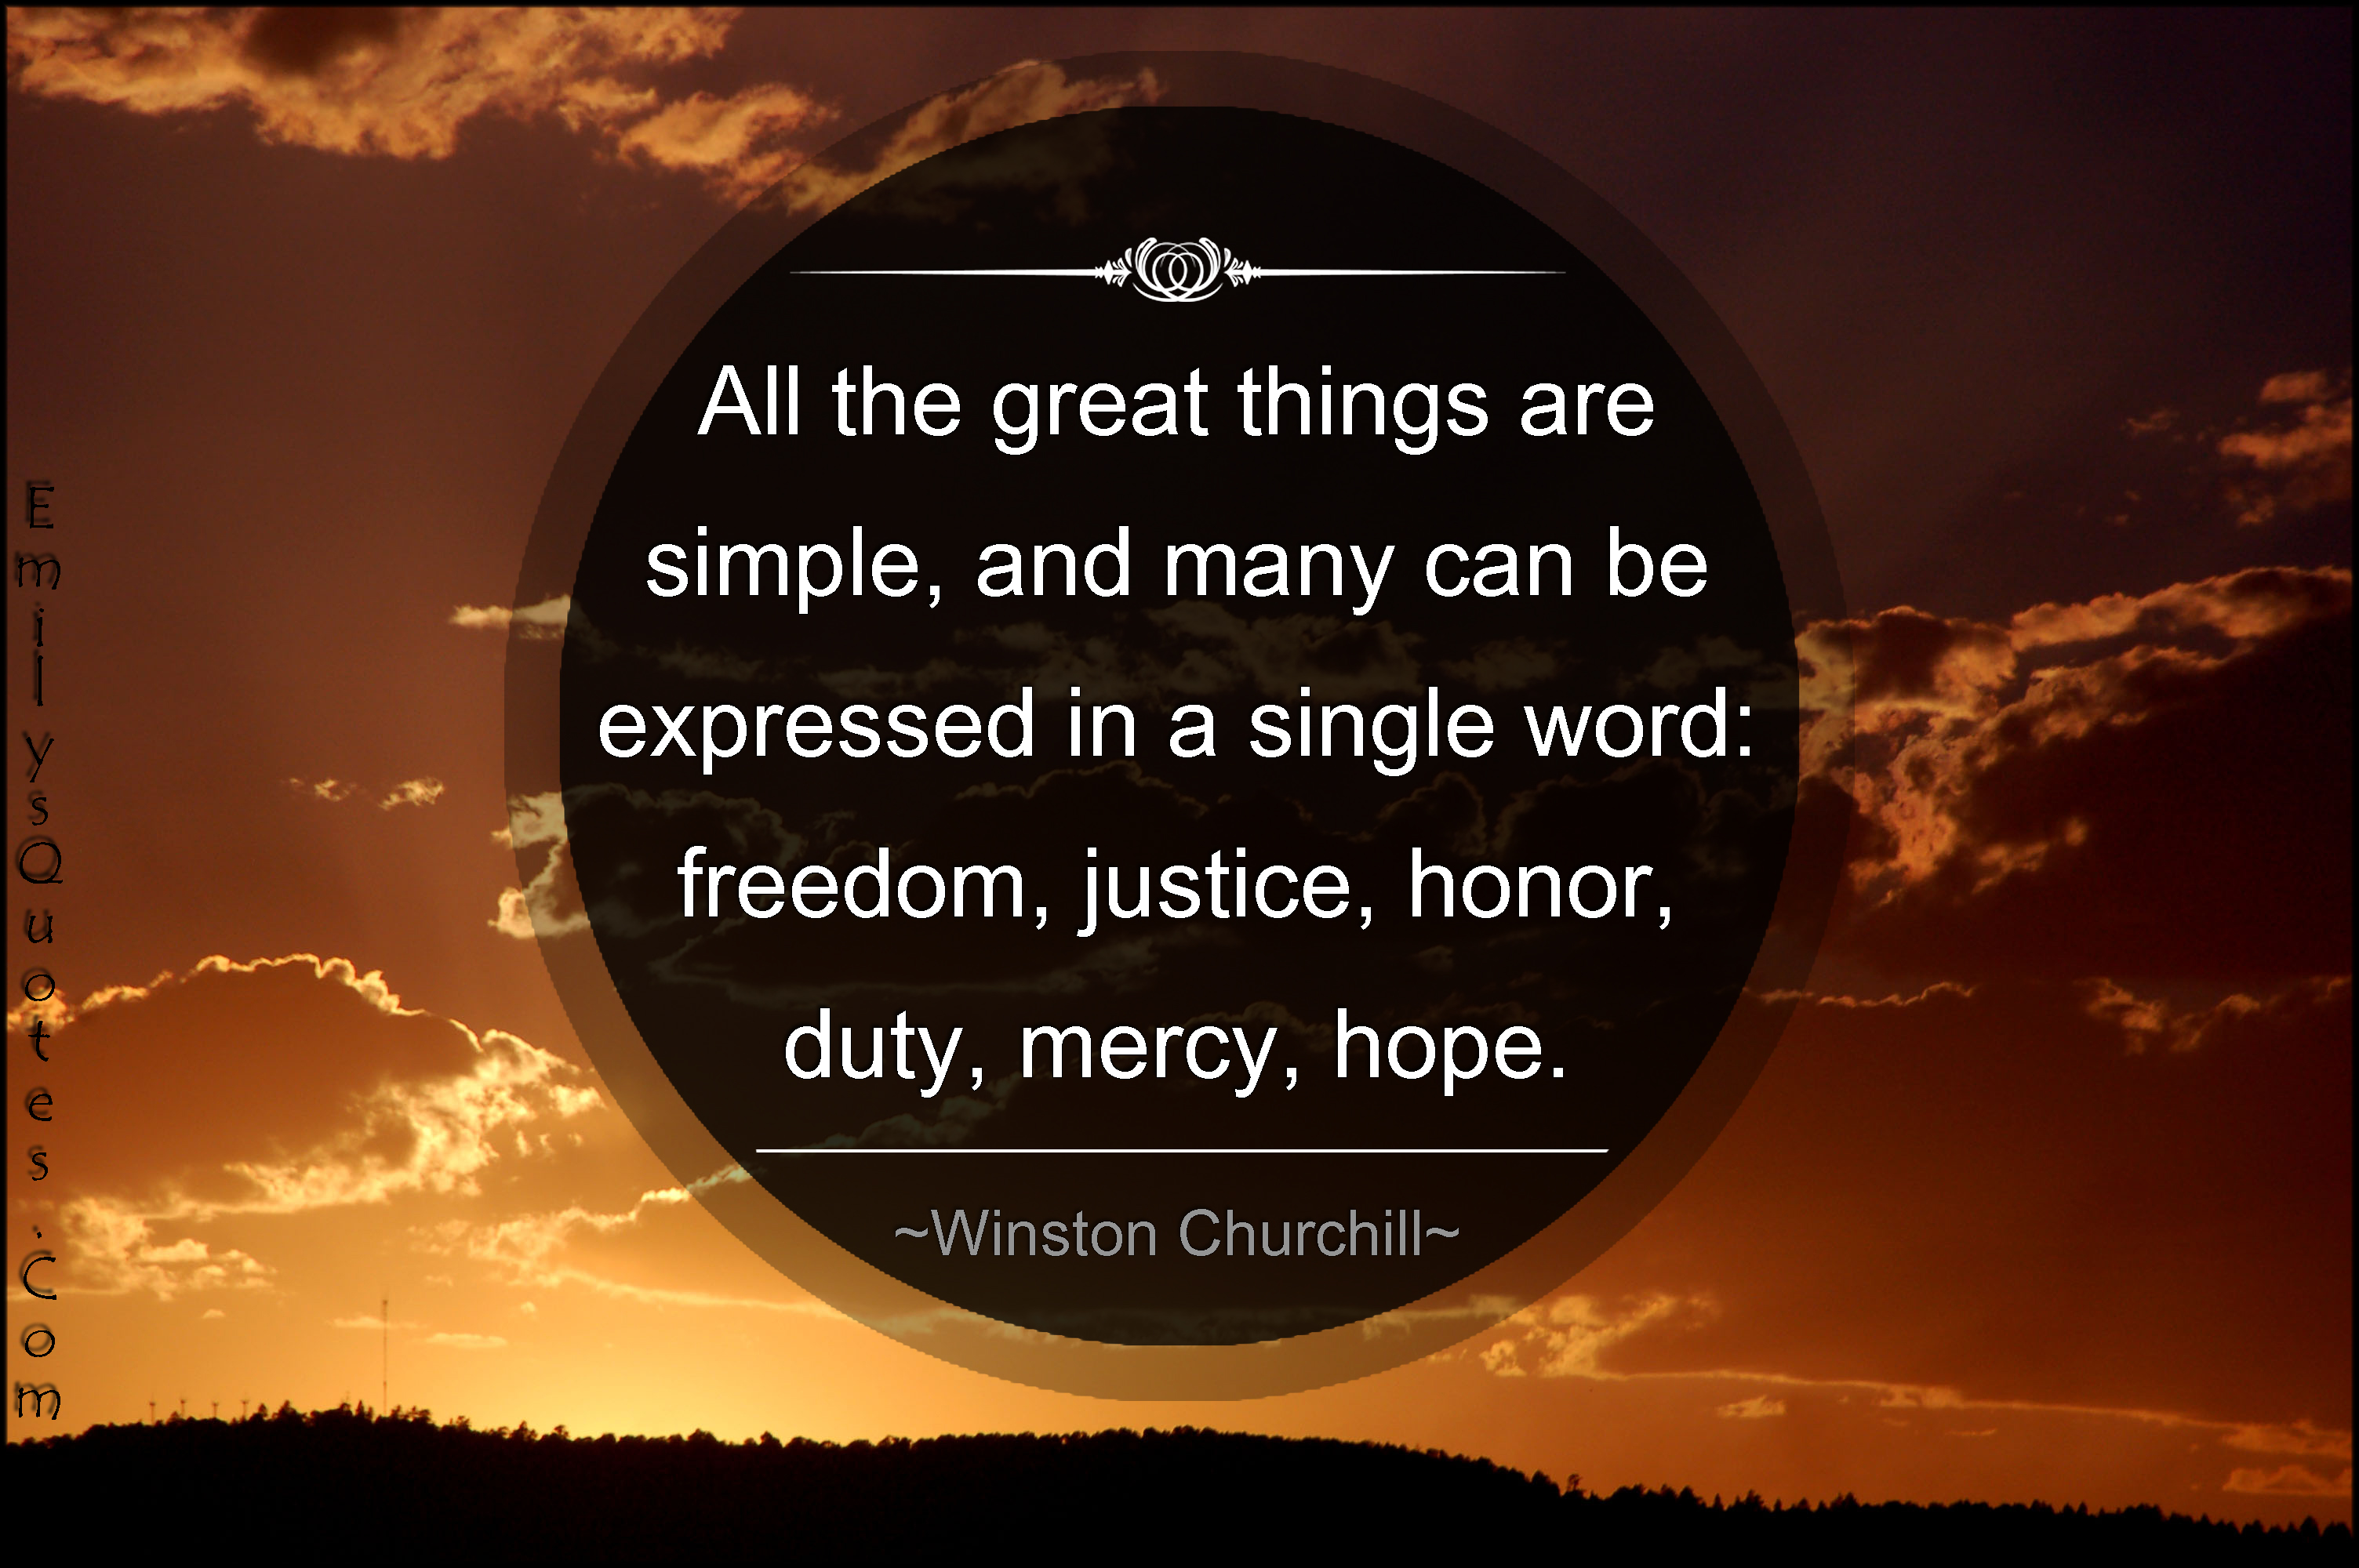 All the great things are simple, and many can be expressed in a single word: freedom, justice, honor, duty, mercy, hope